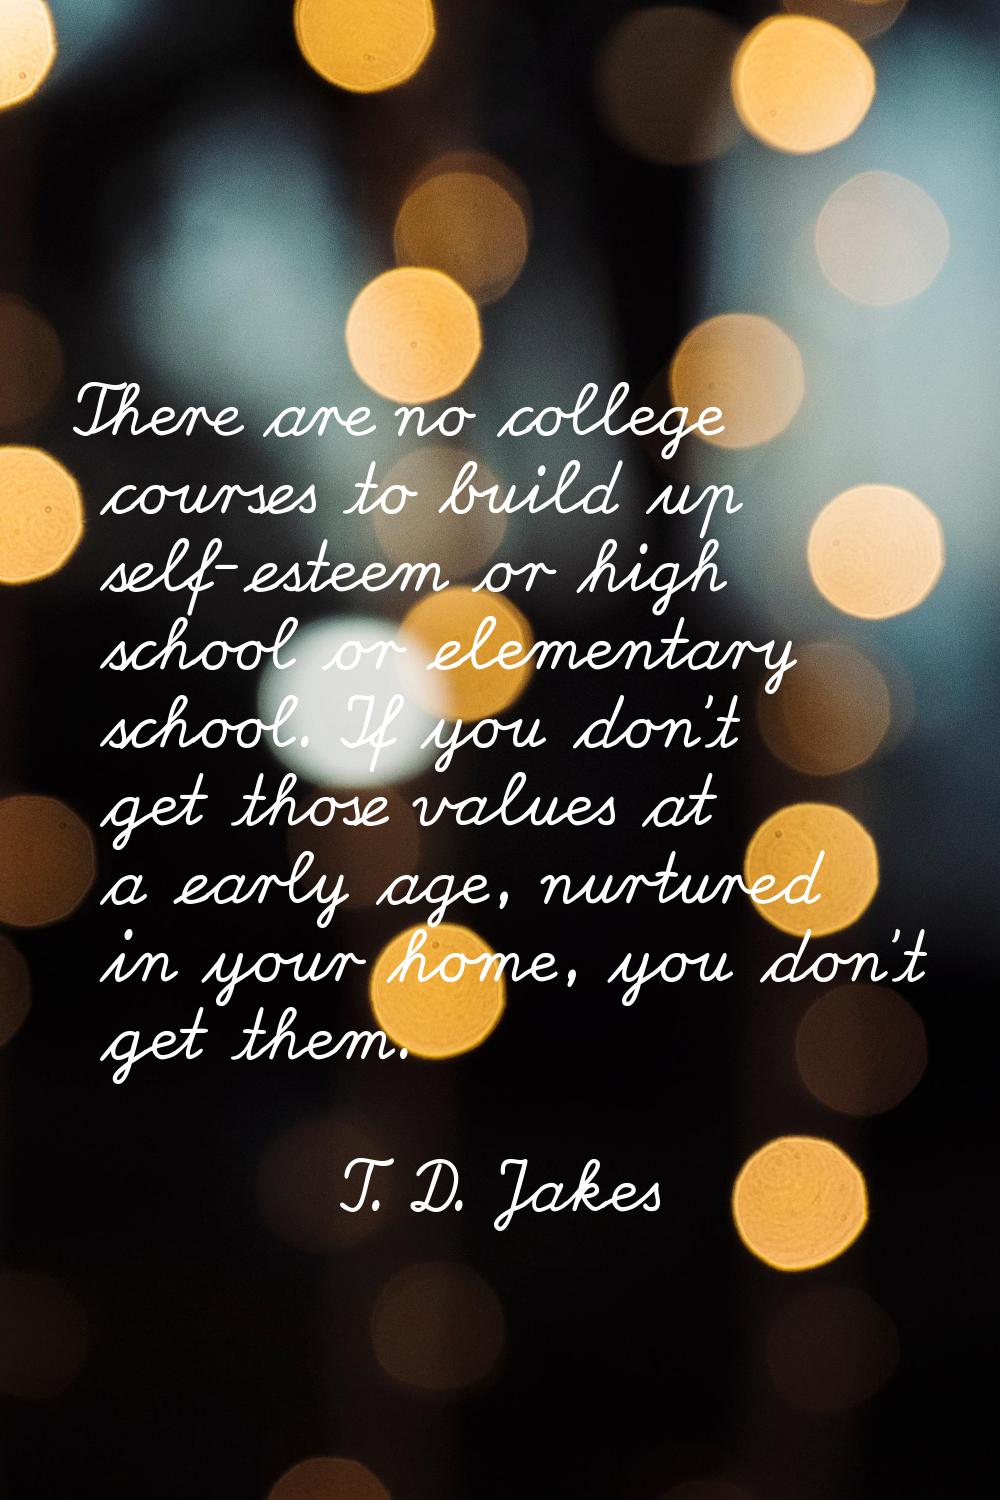 There are no college courses to build up self-esteem or high school or elementary school. If you do